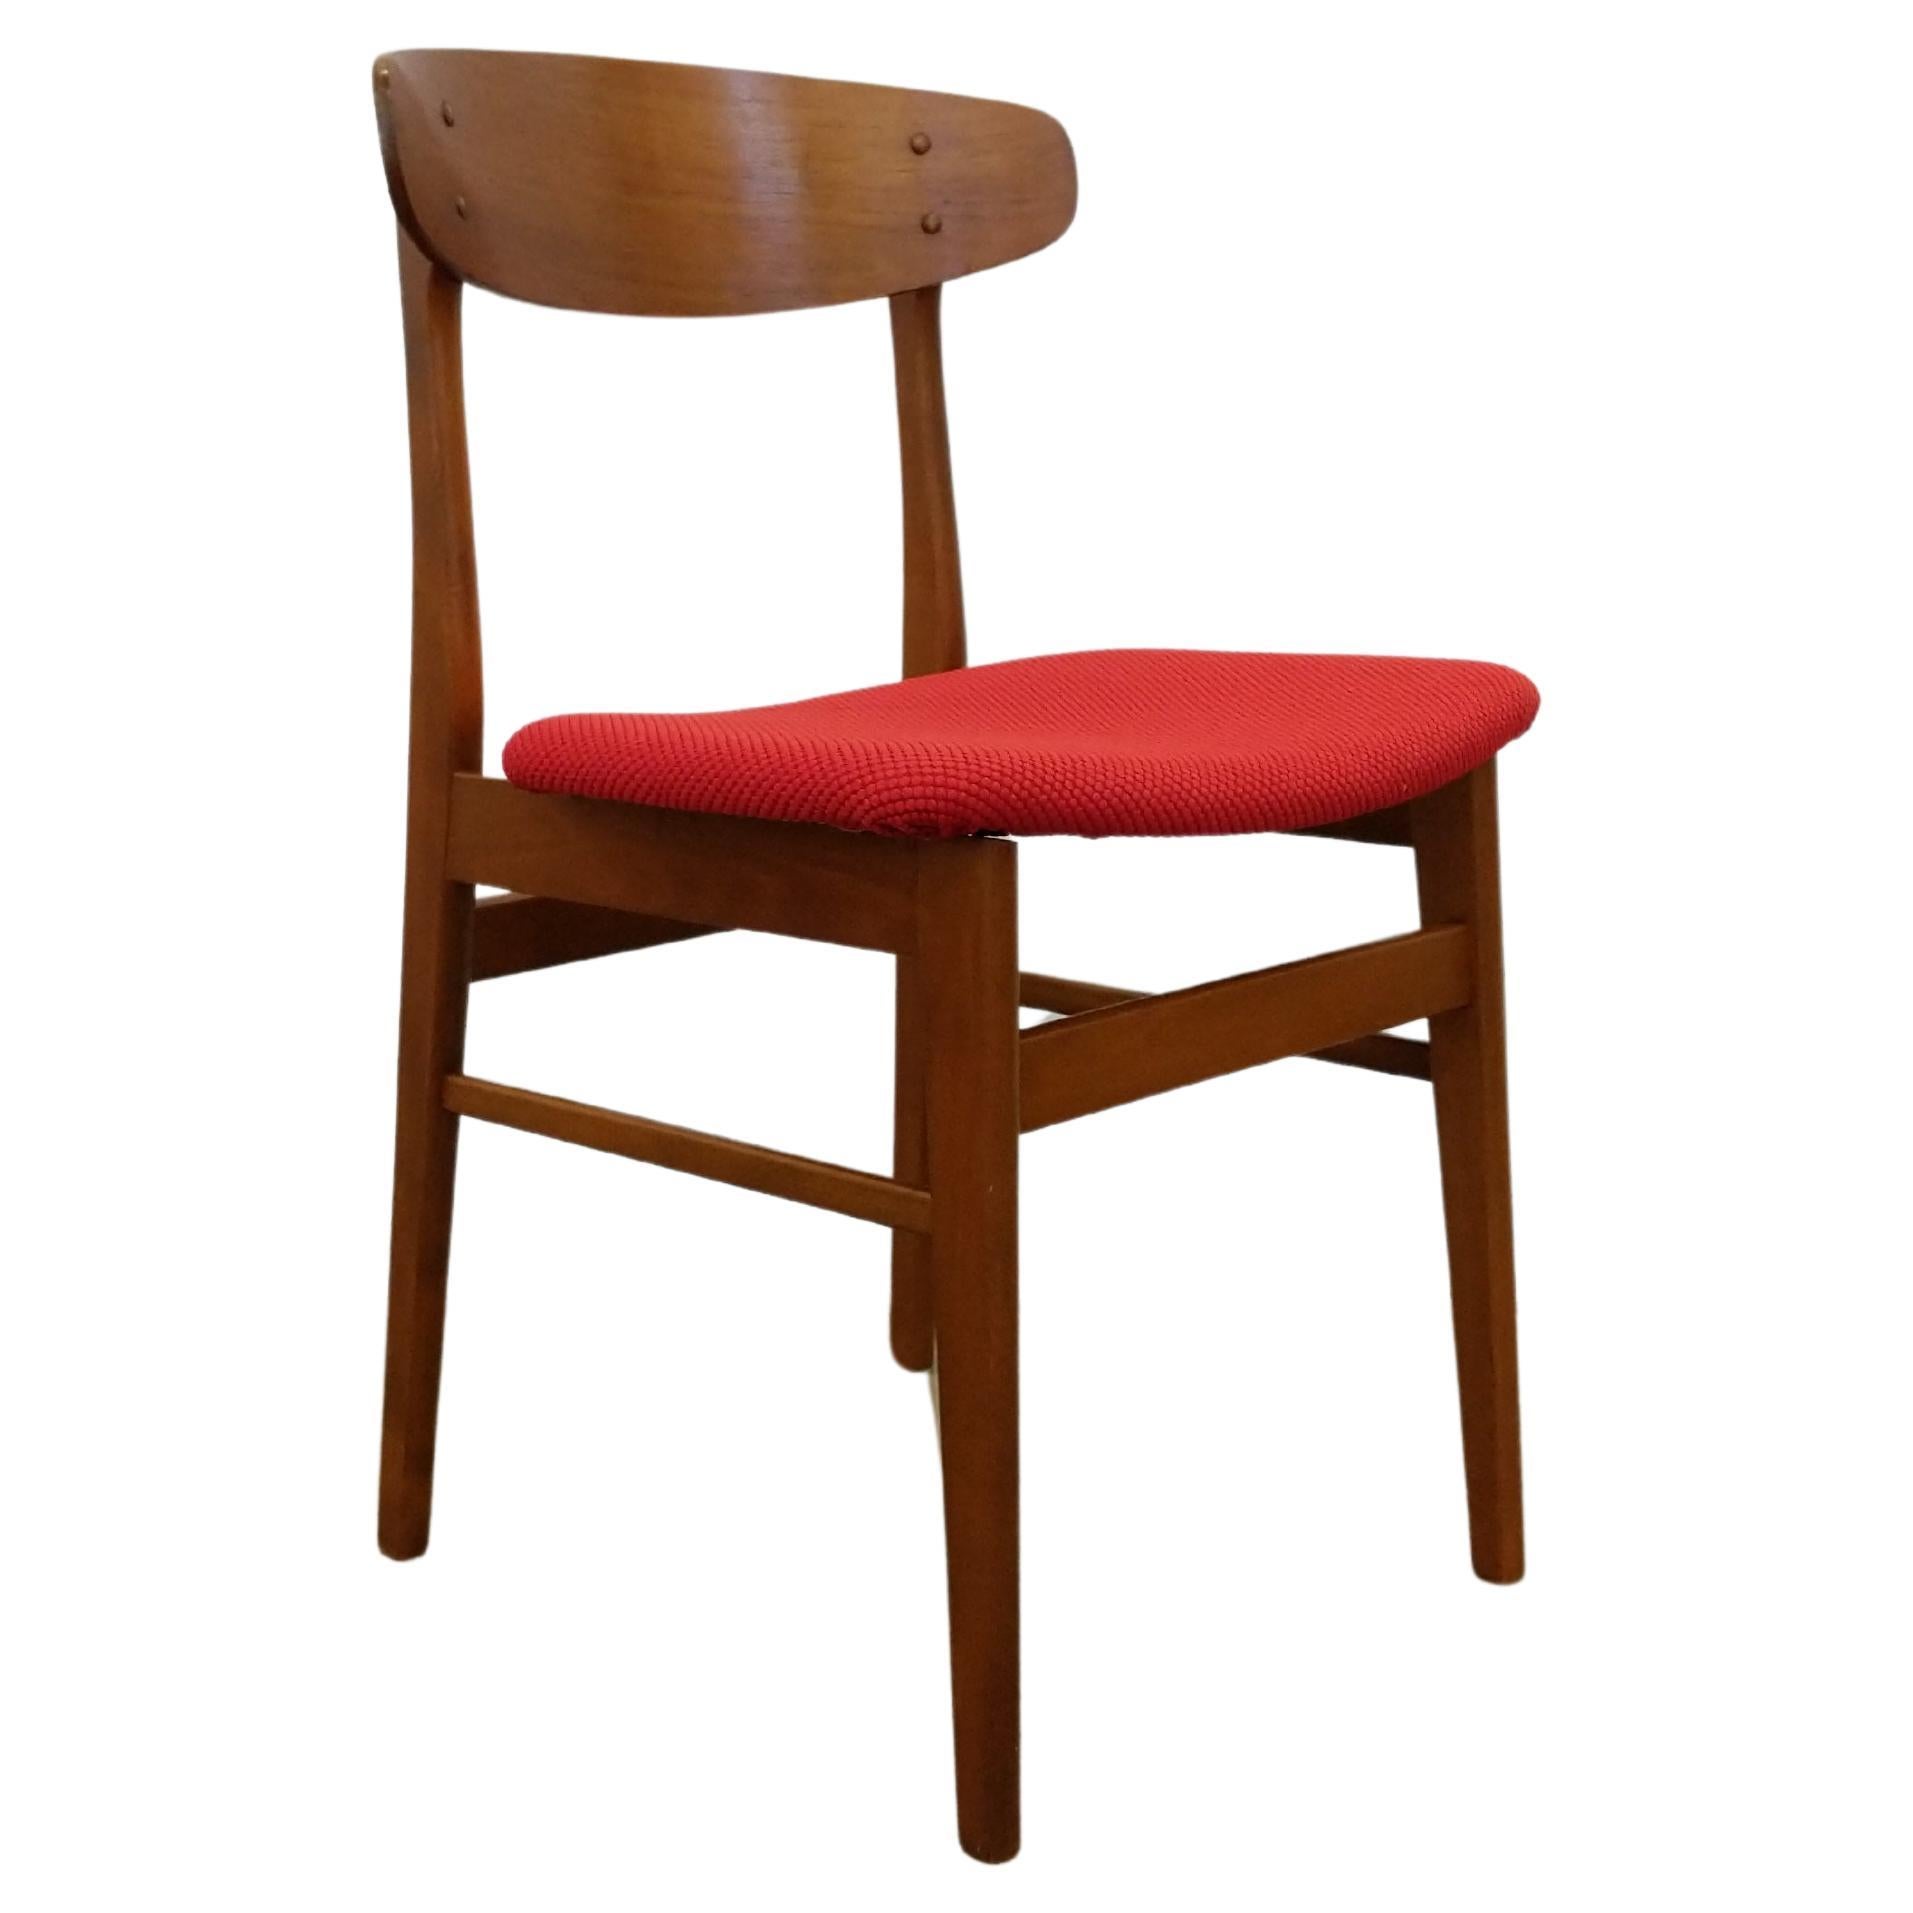 Vintage Danish Mid Century Modern Dining Chair For Sale